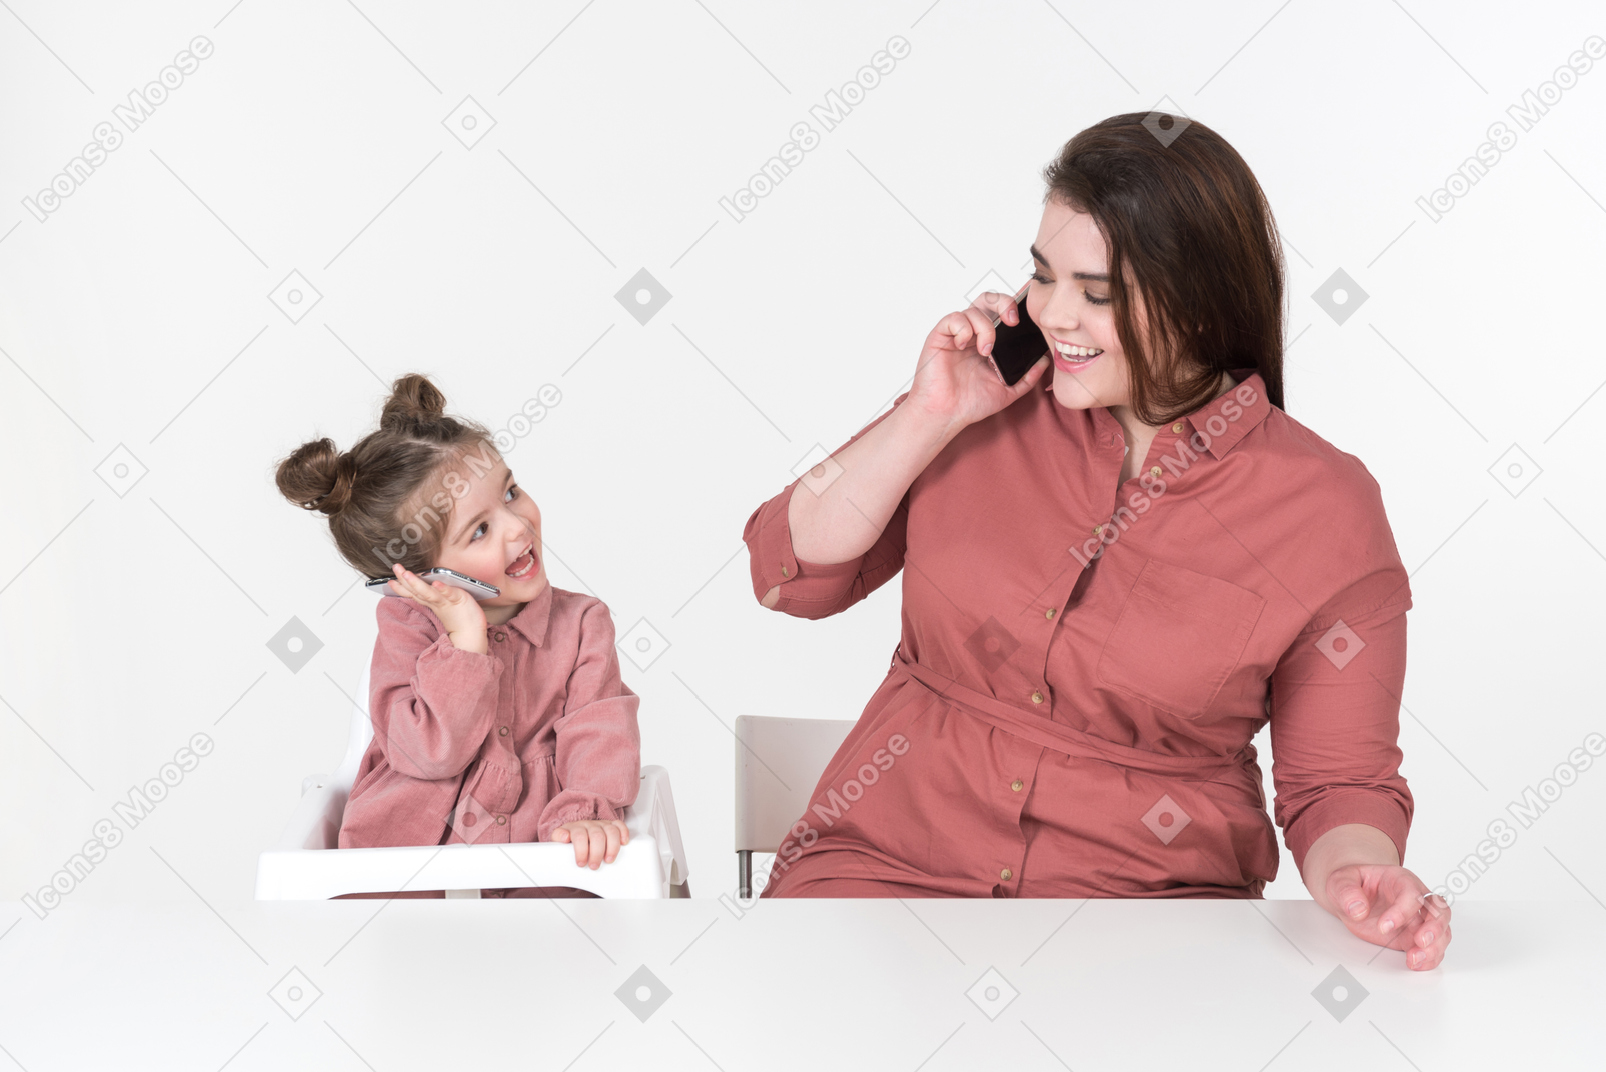 Mother and her little daughter, wearing red and pink clothes, sitting at the dinner table with smartphones in their hands